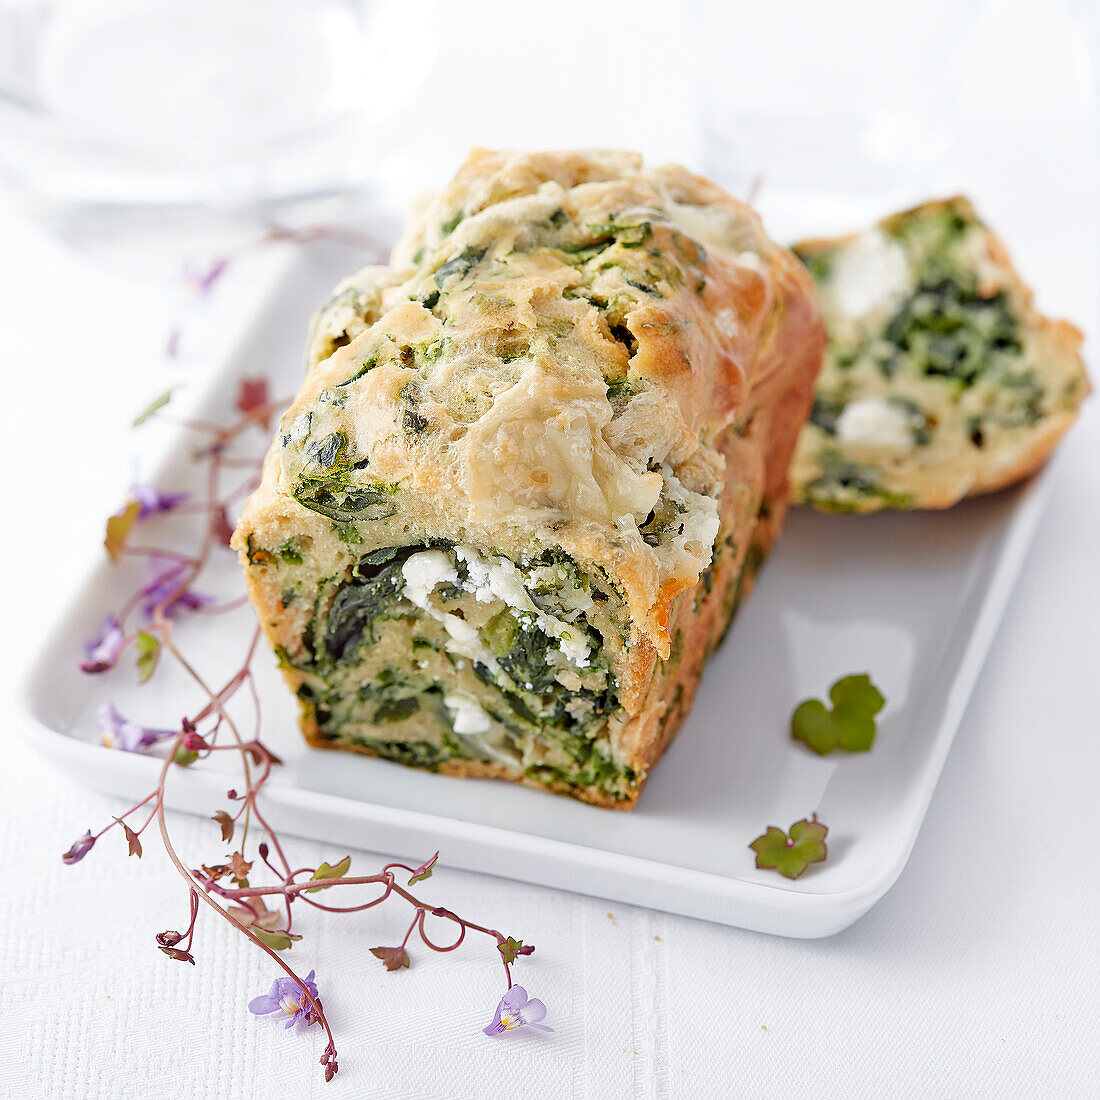 Spicy box cake with spinach and goat’s cheese